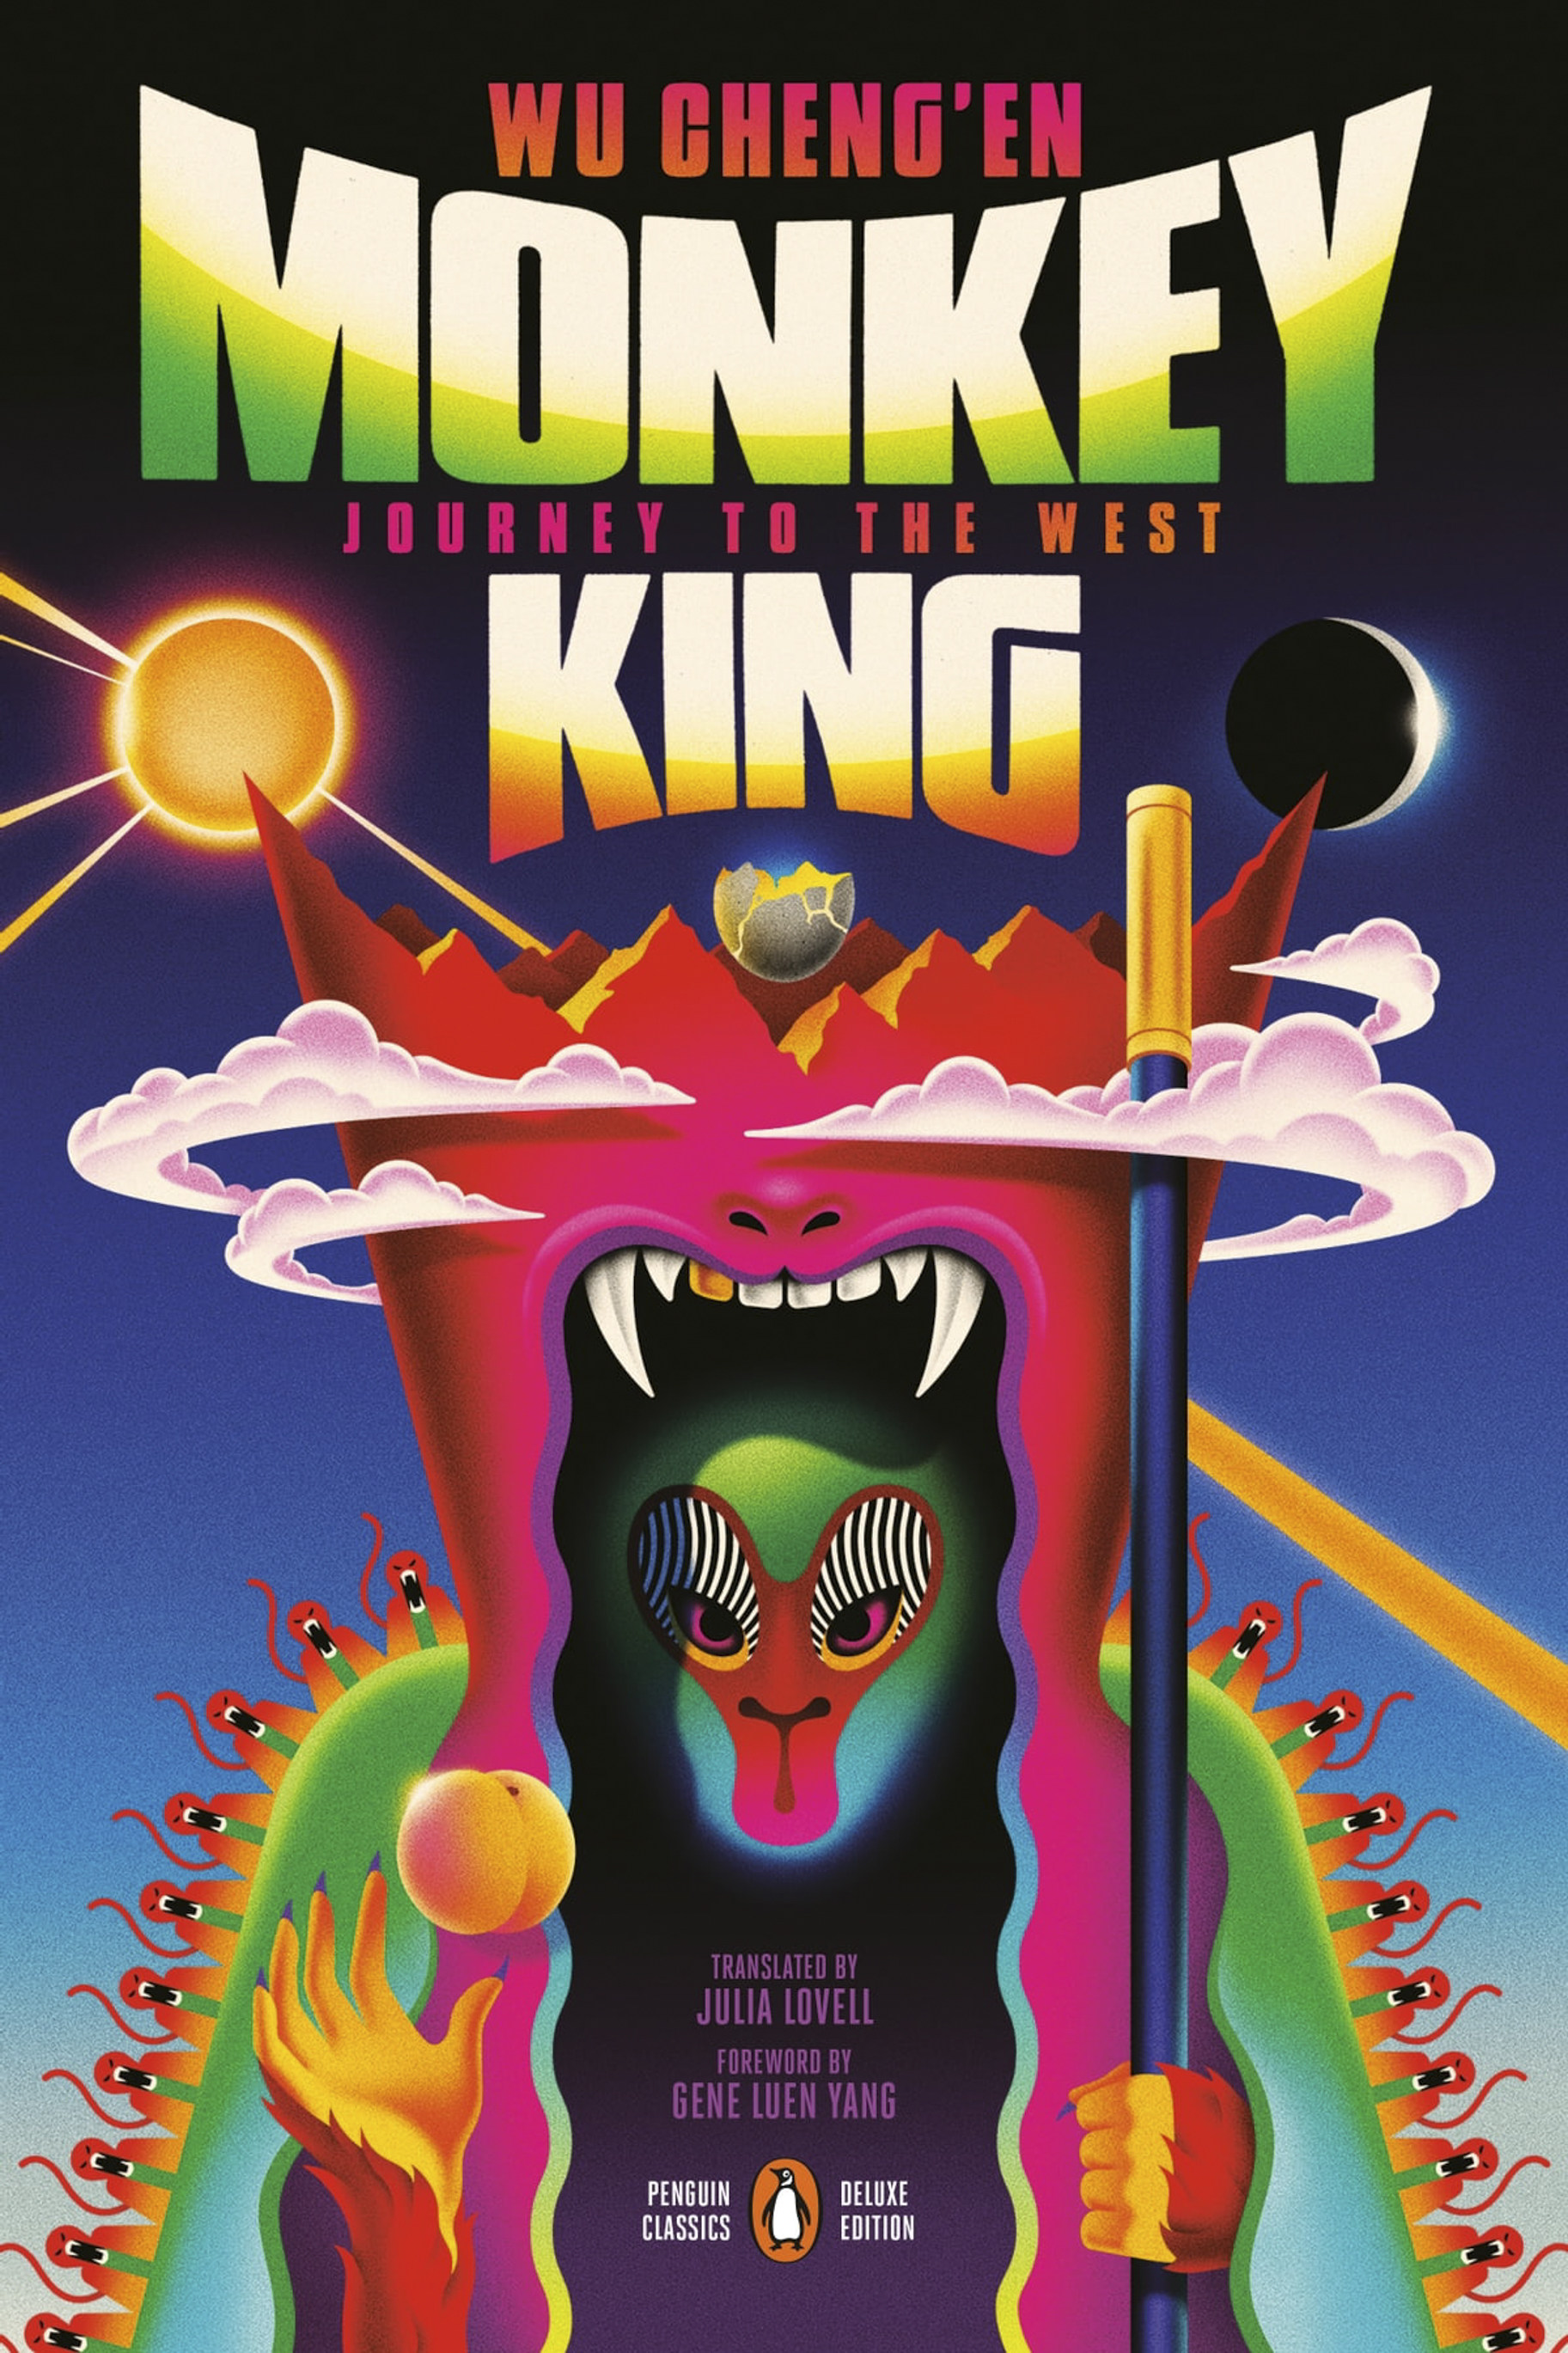 Book cover Monkey King by Wu Cheng’en (Translated by Julia Lovell. Penguin Classic, 2021)..jpeg